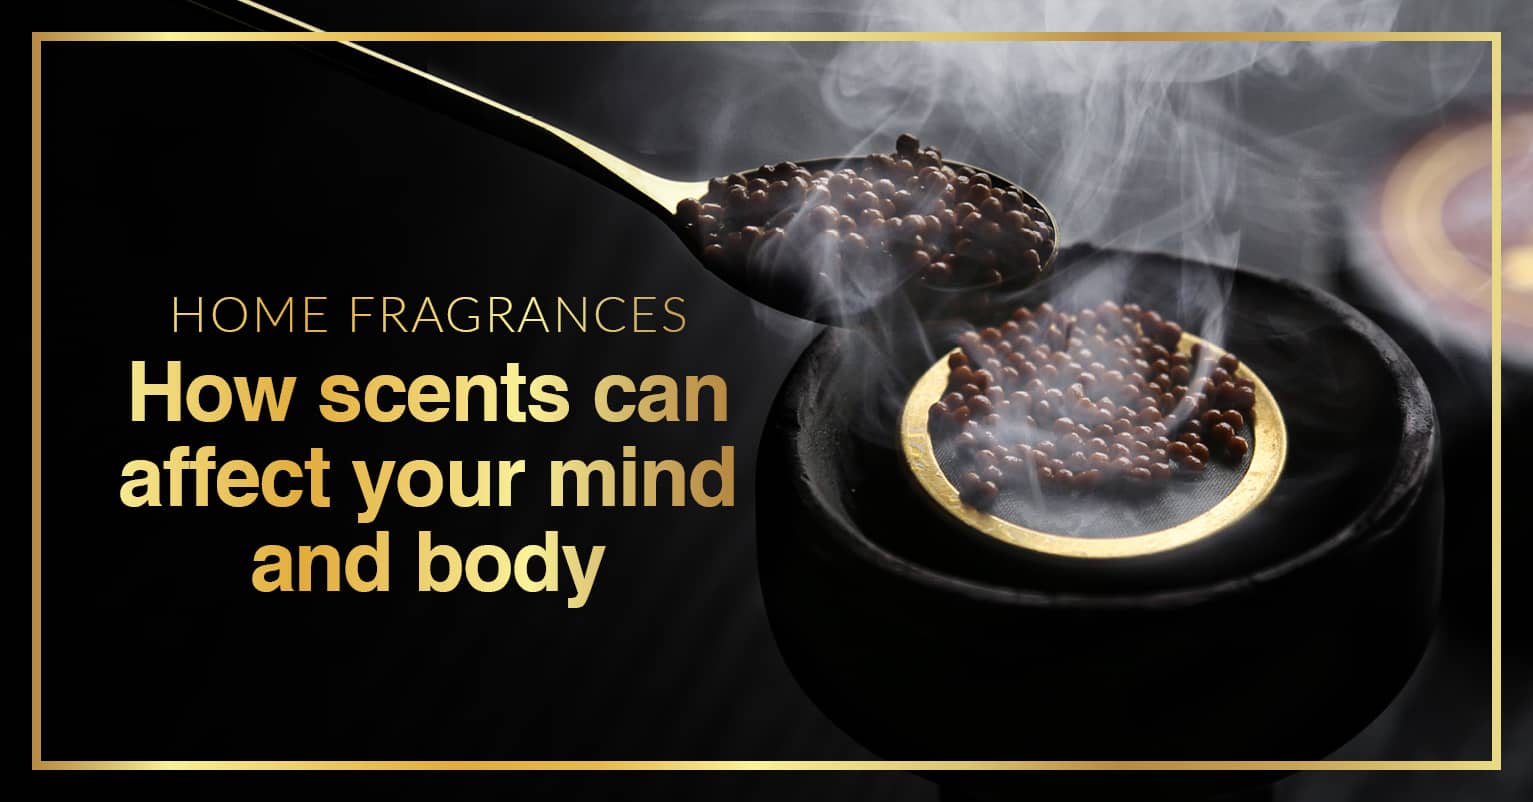 Home Fragrances and How Scent Can Affect Your Mind and Body